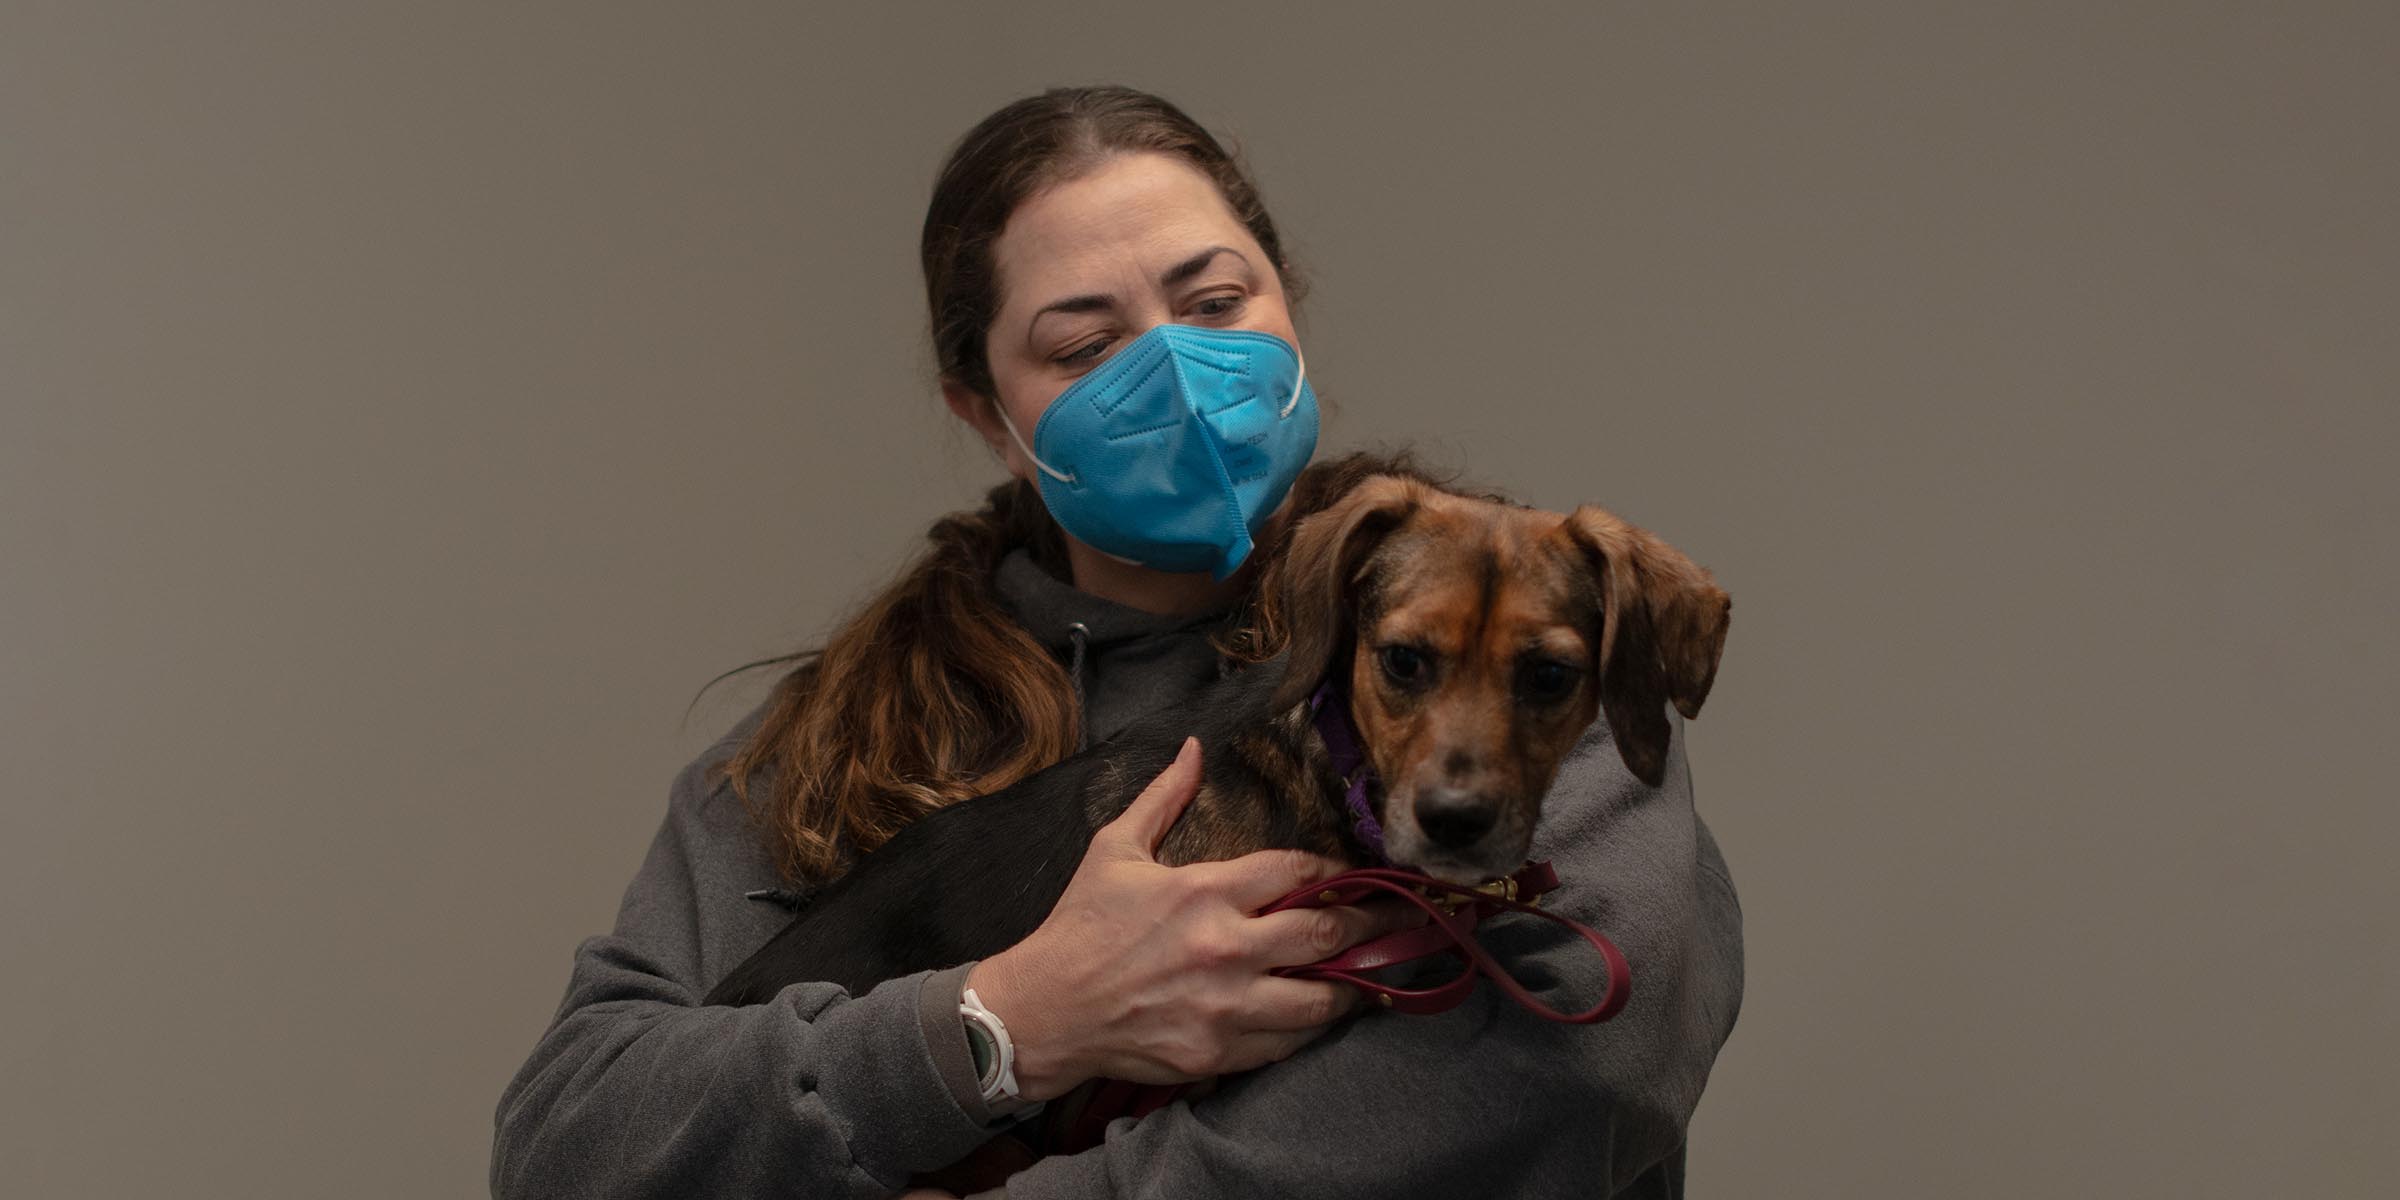 Meet the Trainers who are trying to save the 1,000 dogs that are put down every day